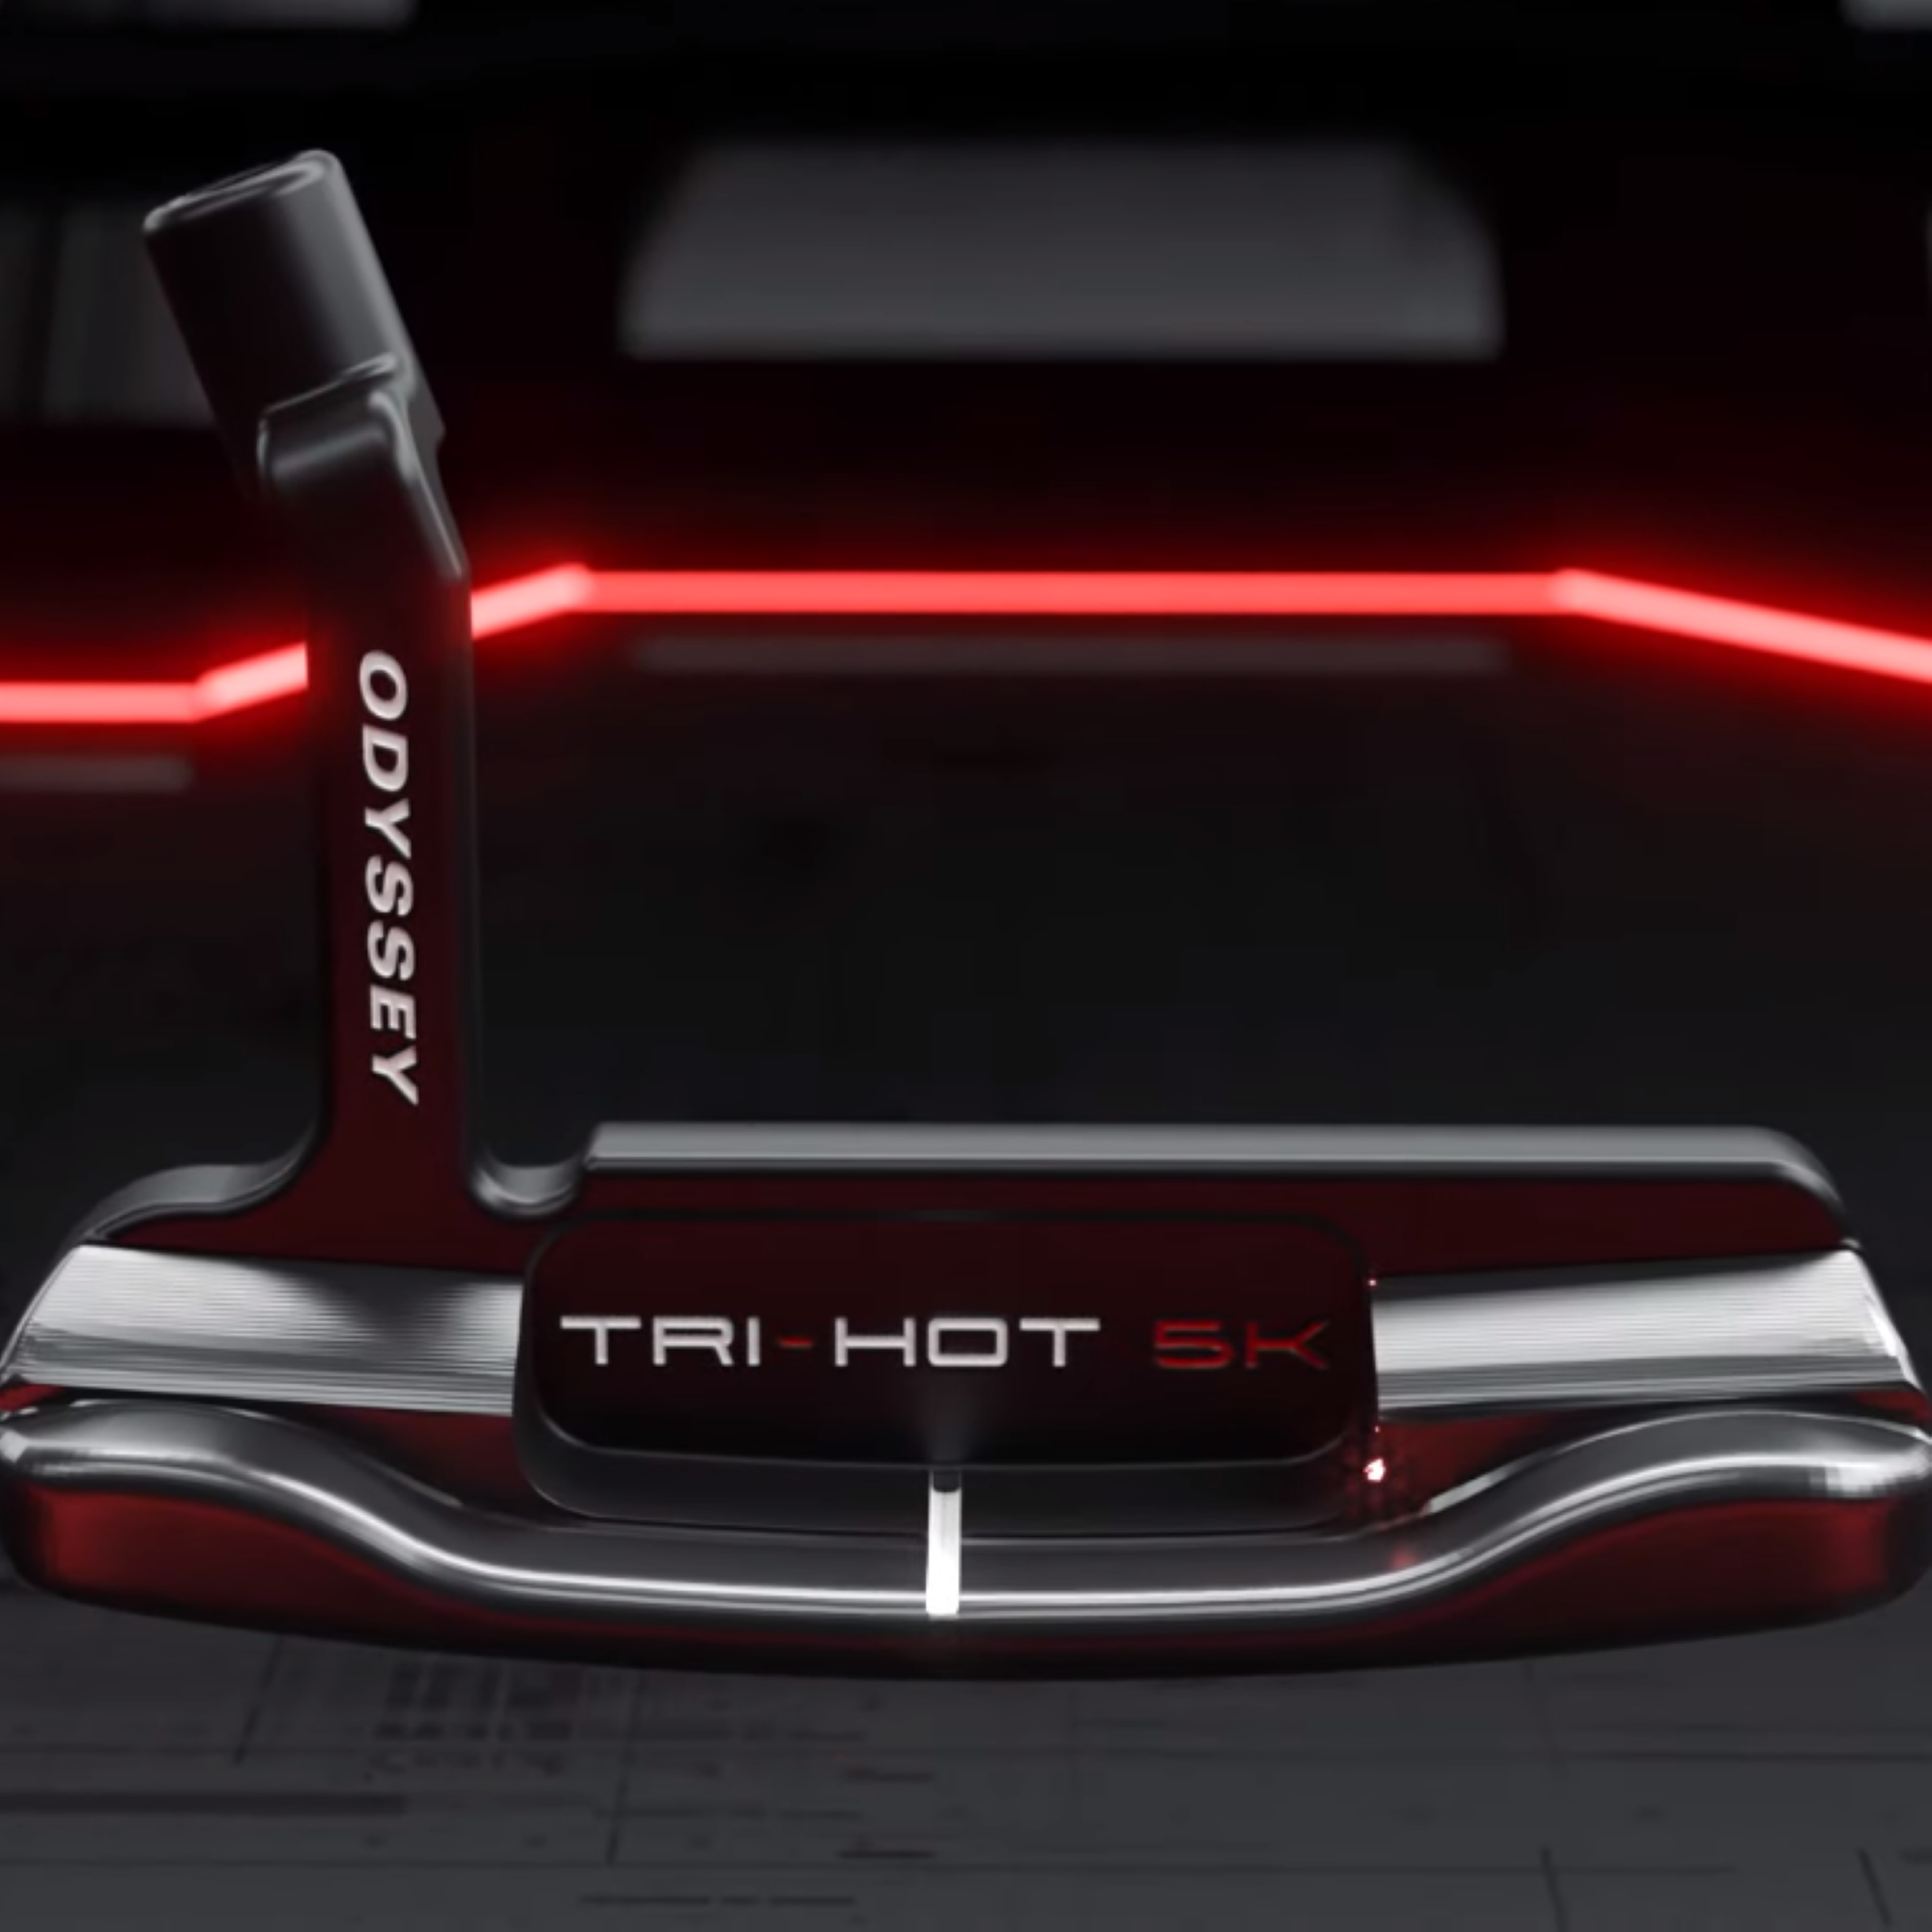 Tri-Hot 5K - A Blade Unlike Any Other